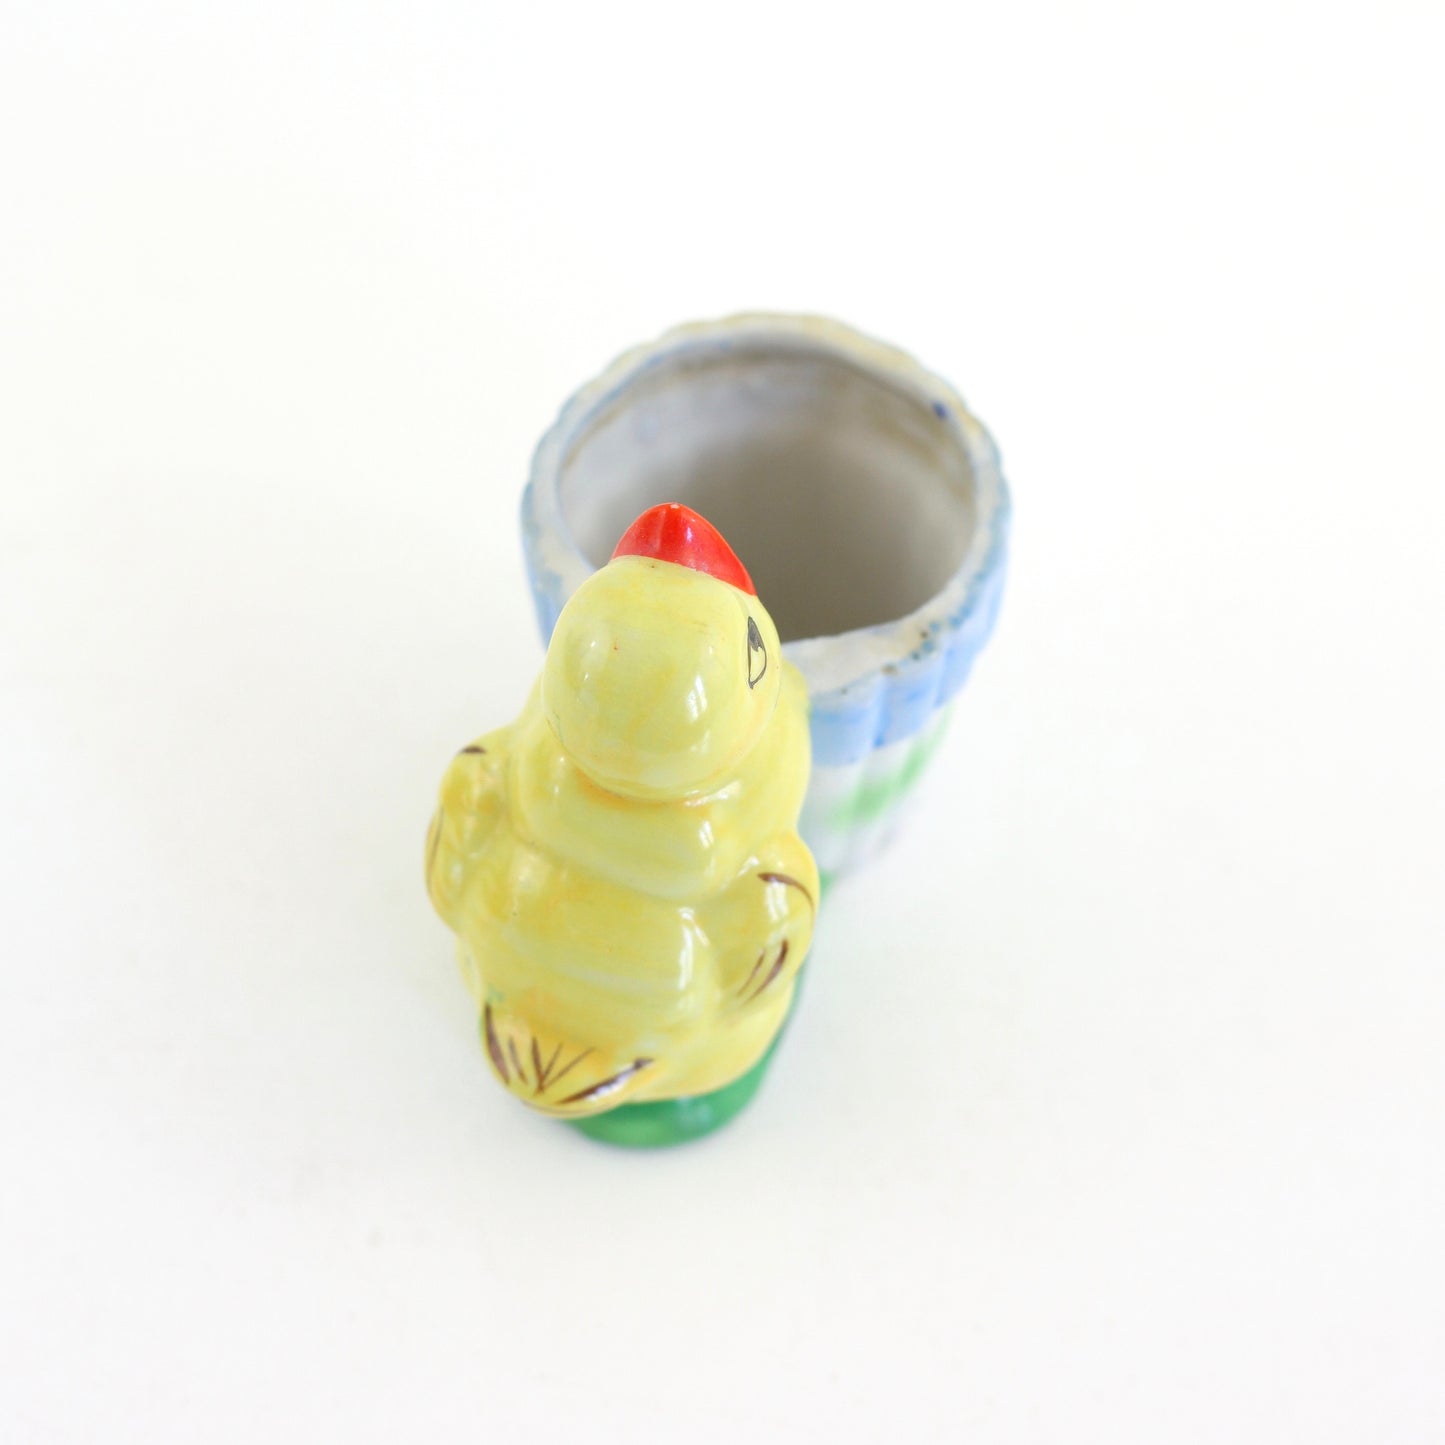 SOLD - Vintage 1950s Chick Planter from Japan